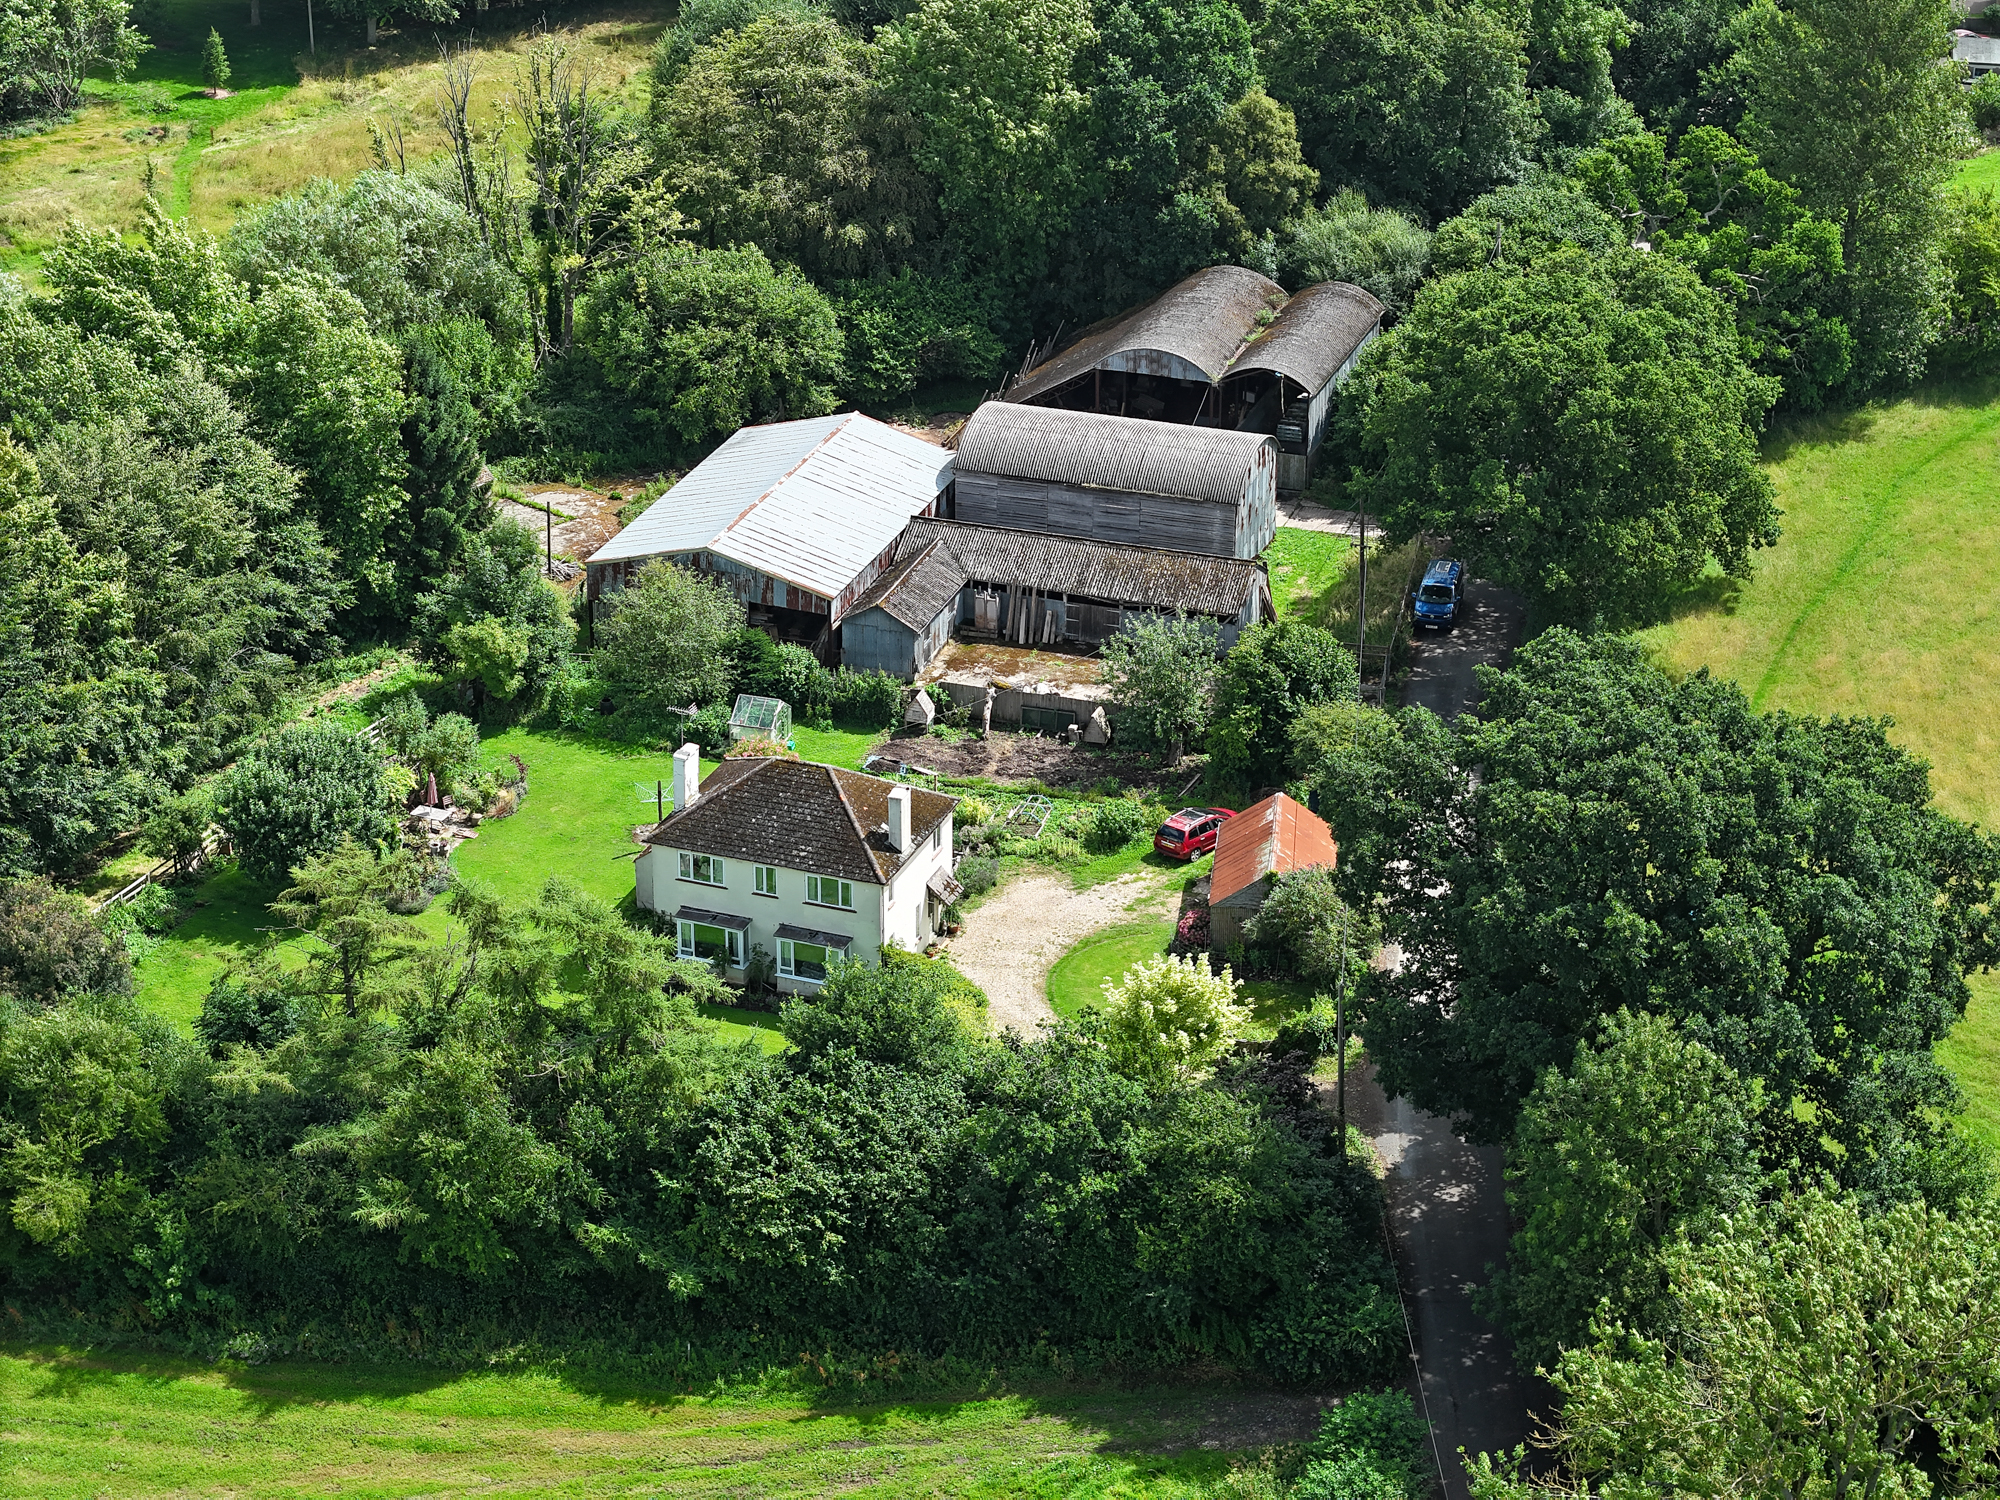 DJI Air 3 aerial photo of a rural home on a sunny day with the 70mm telephoto camera